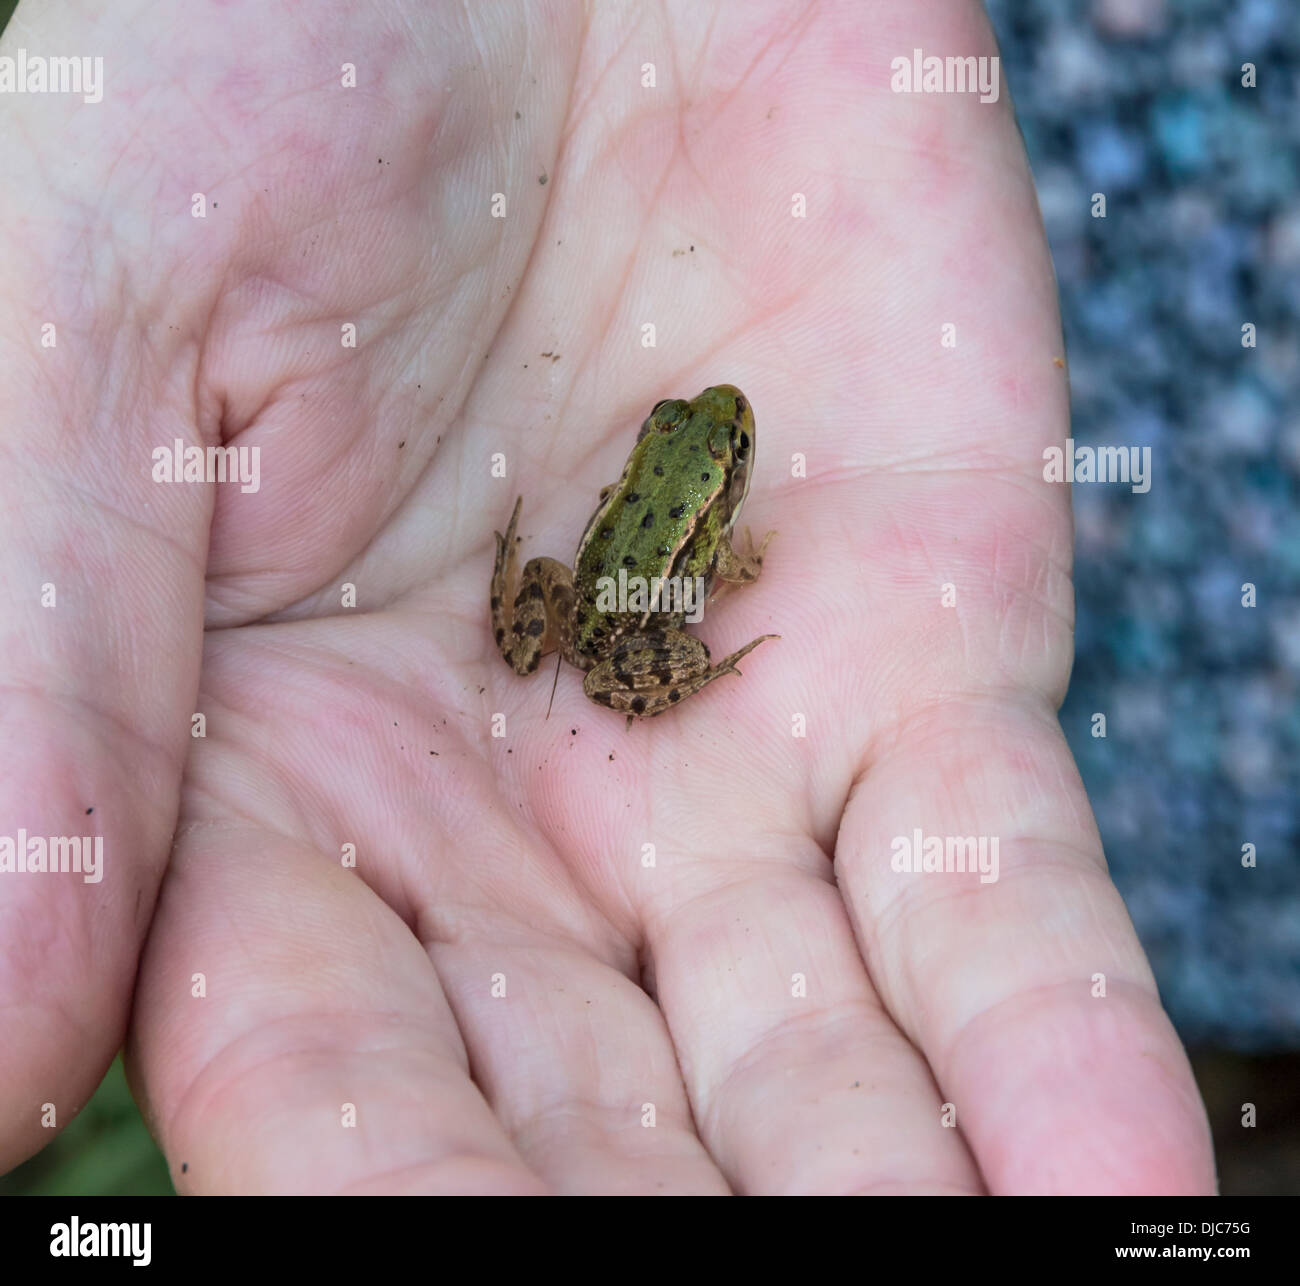 Litttle baby frog sits in the middle of human palm Stock Photo - Alamy